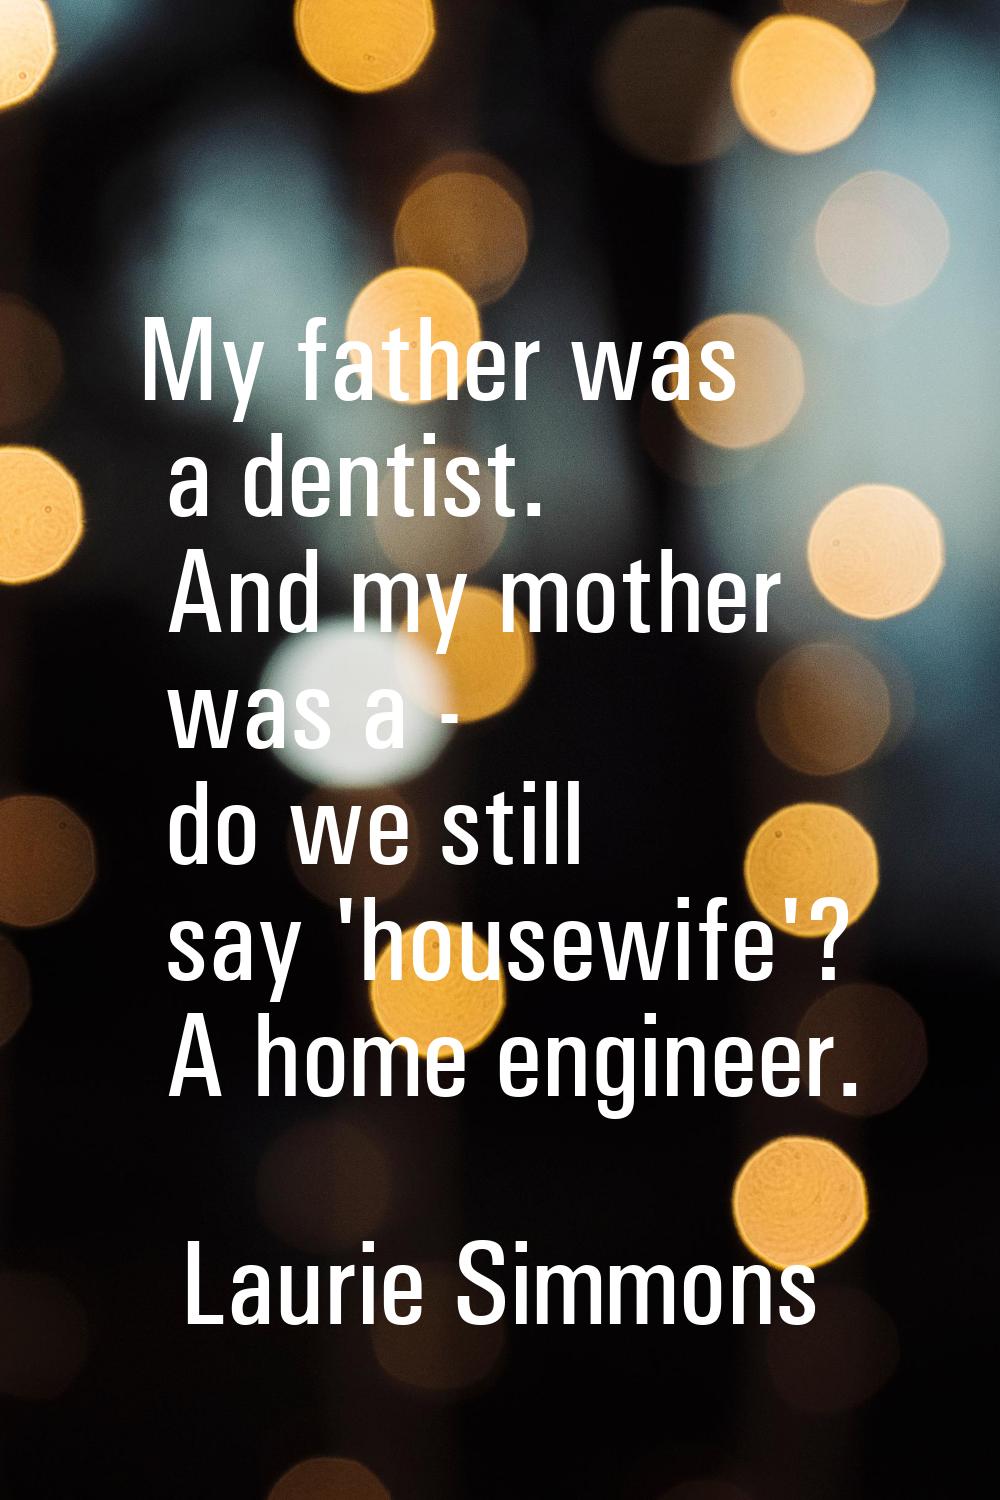 My father was a dentist. And my mother was a - do we still say 'housewife'? A home engineer.